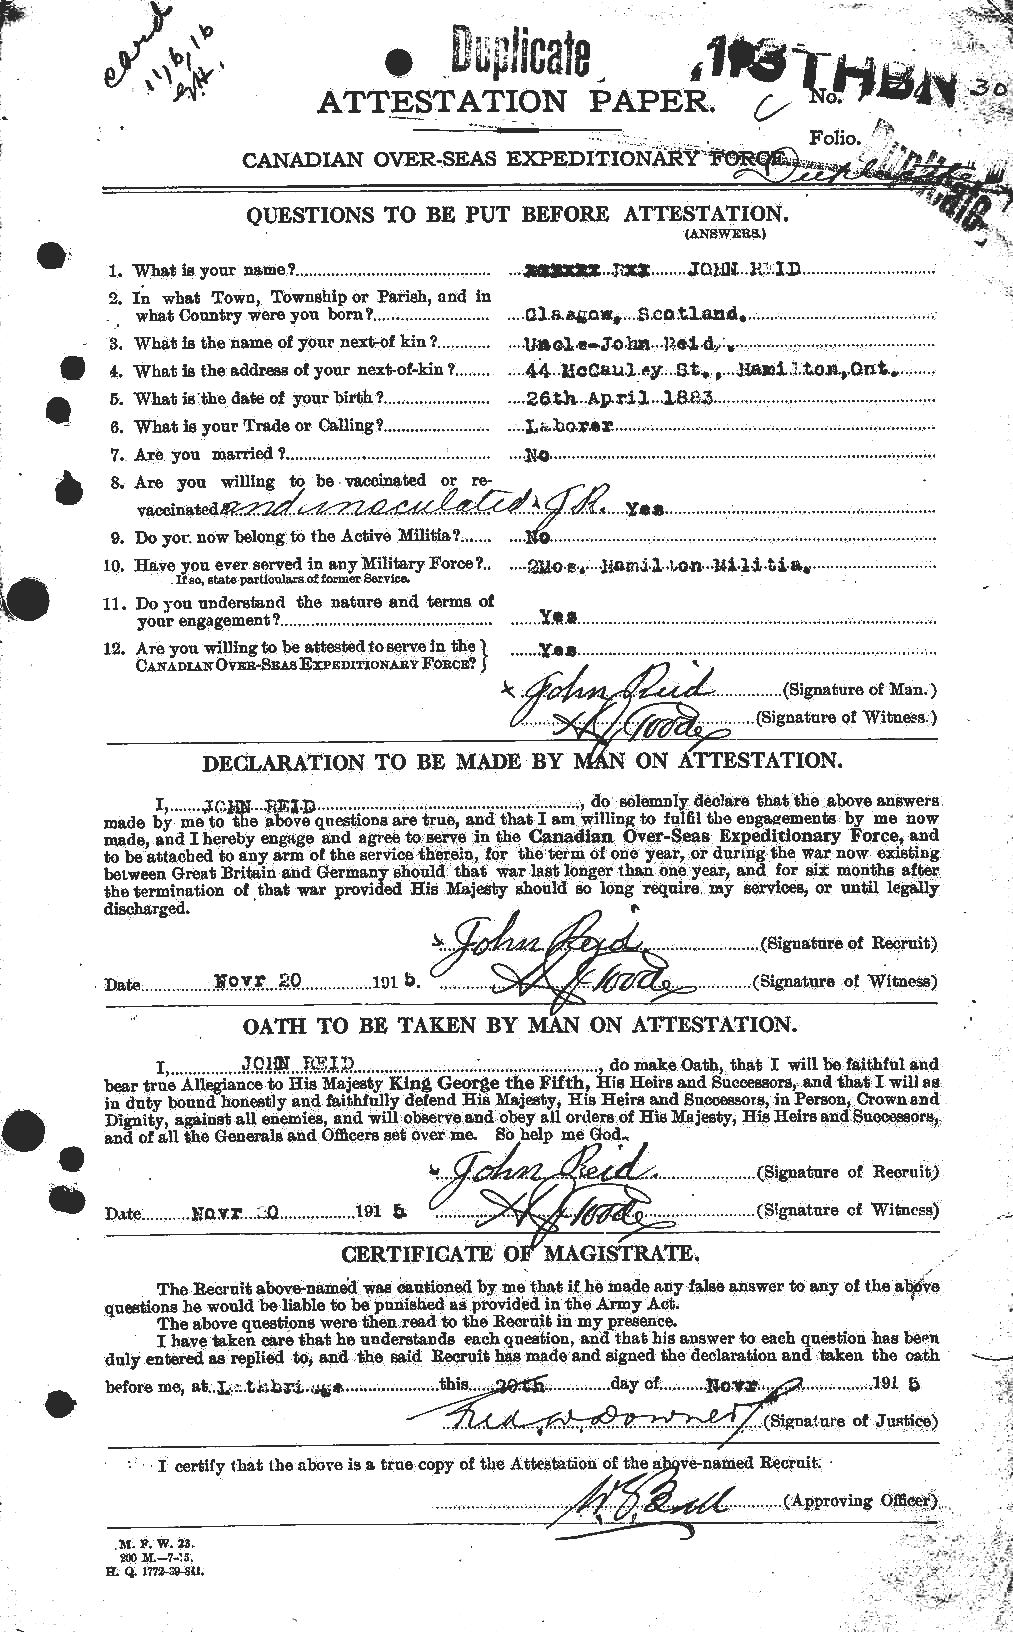 Personnel Records of the First World War - CEF 598788a